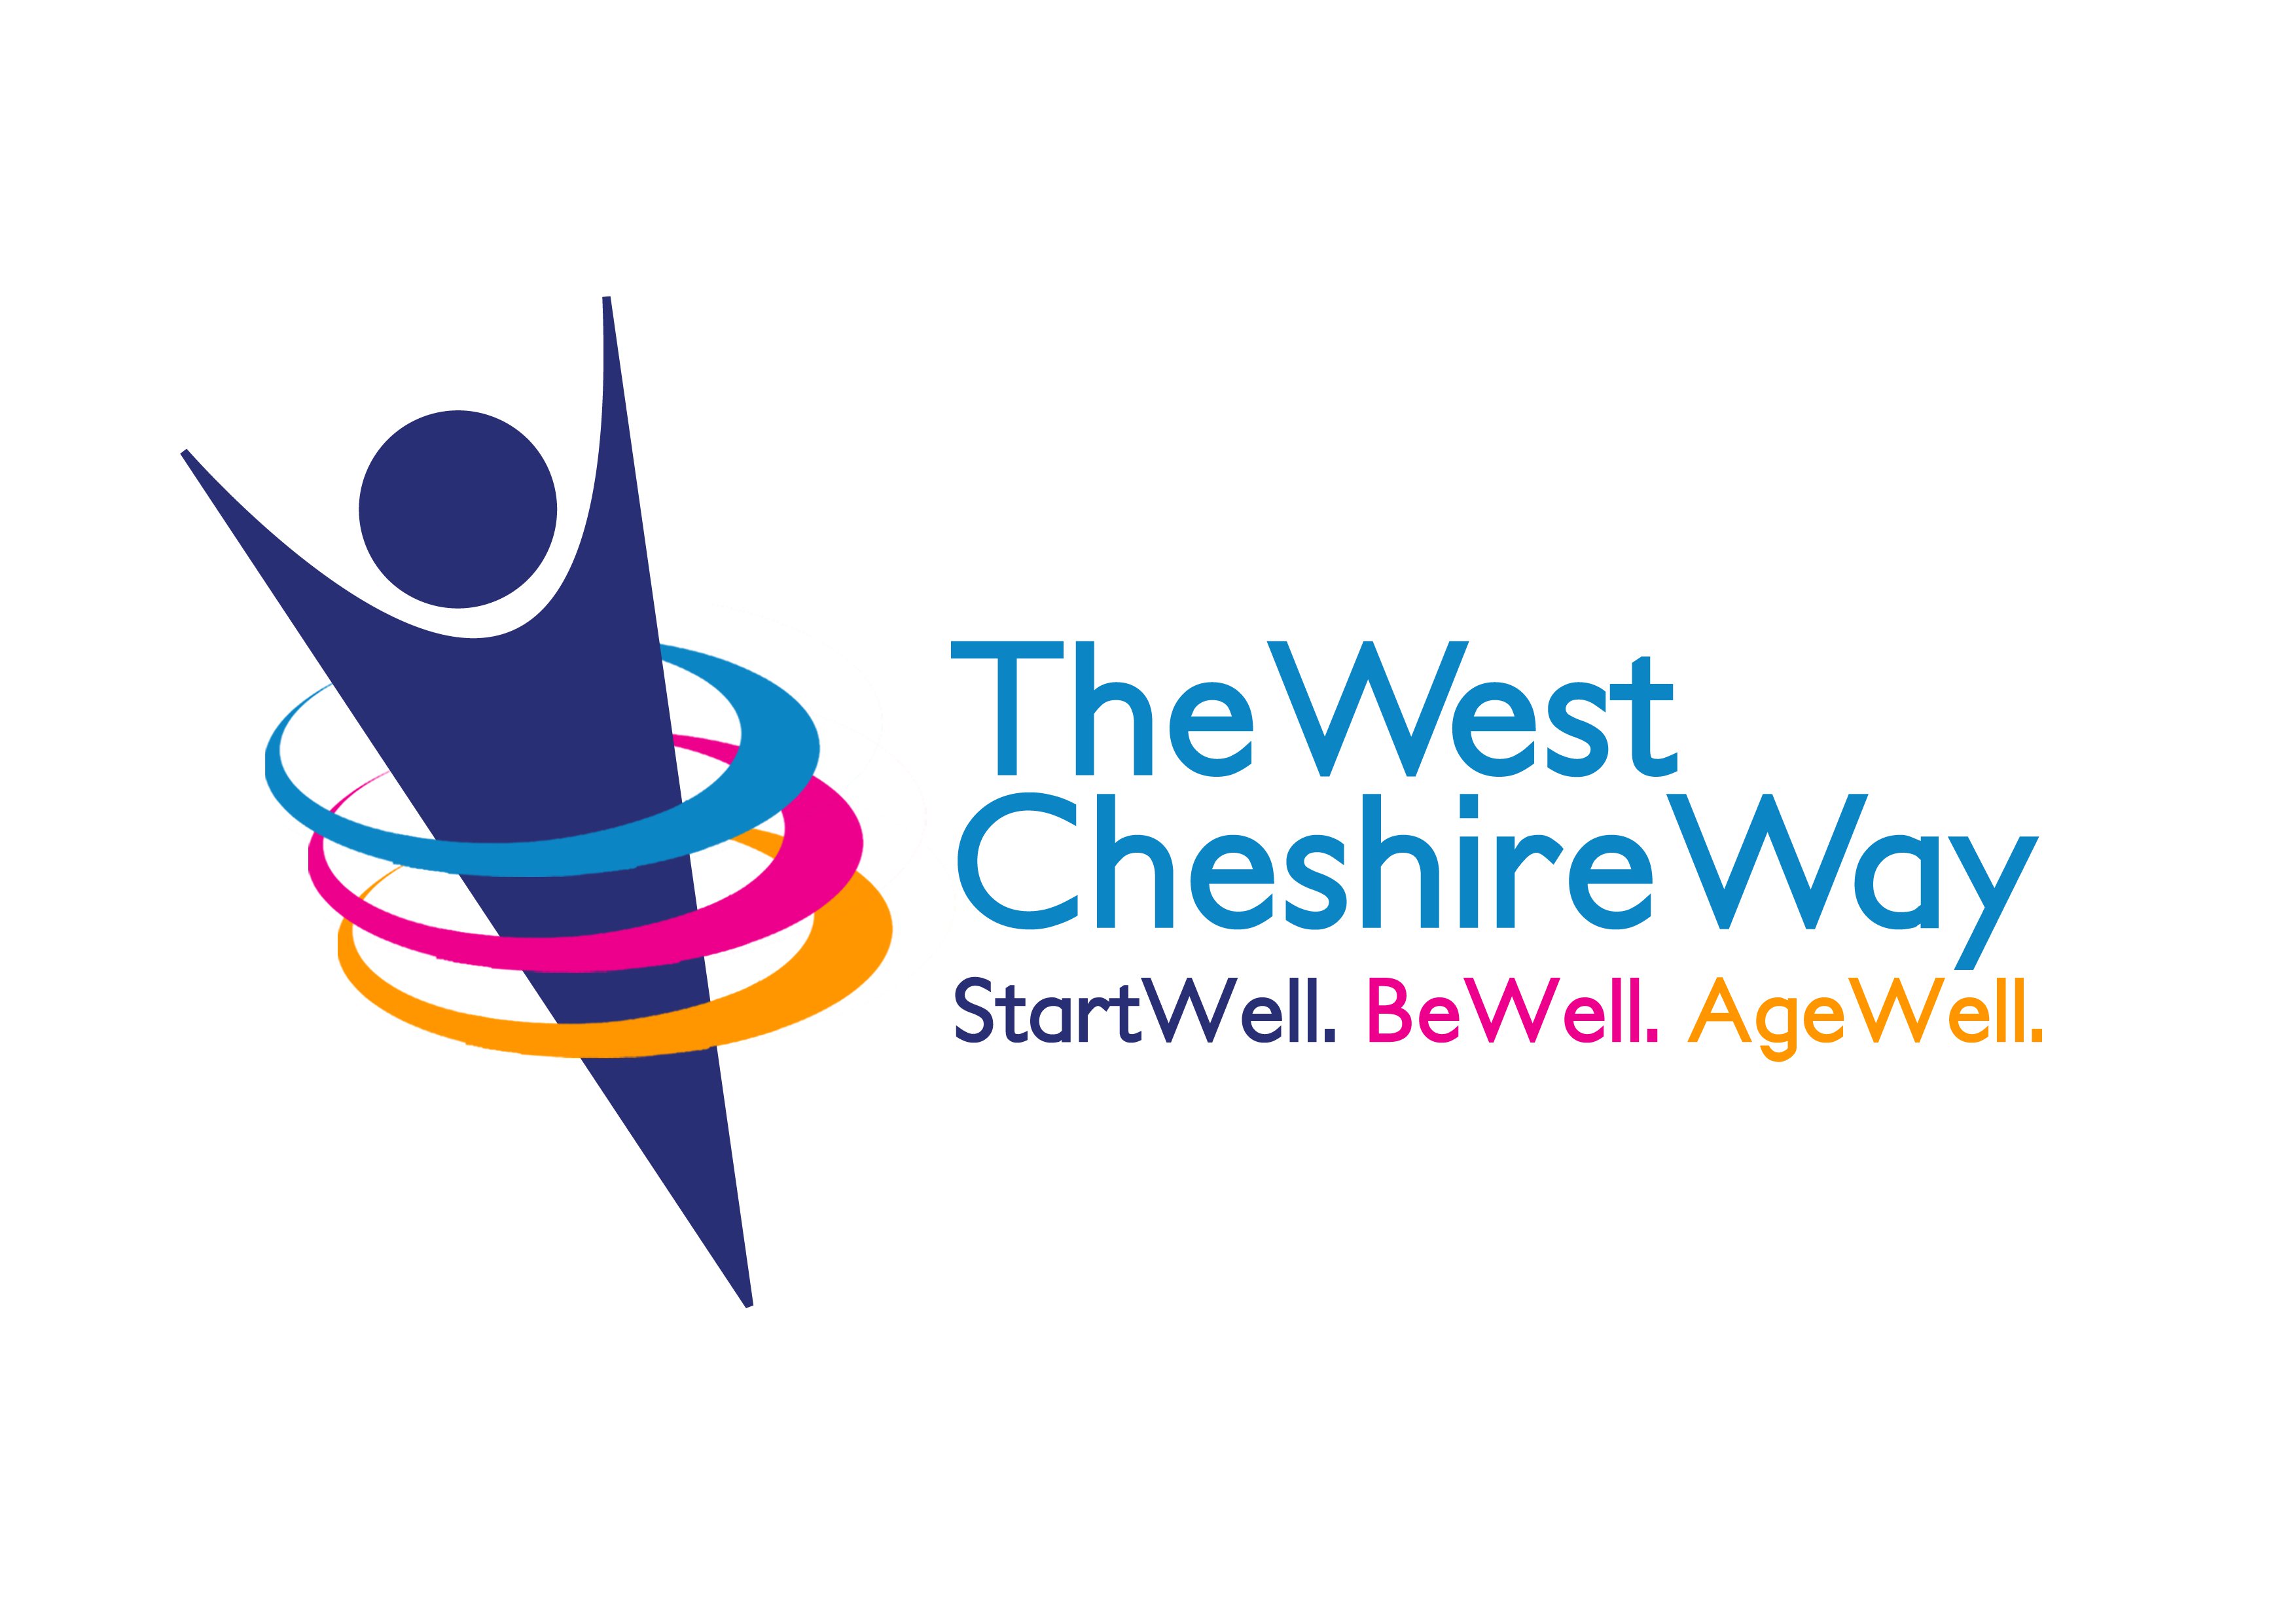 New online service to be extended by West Cheshire Way vanguard featured image